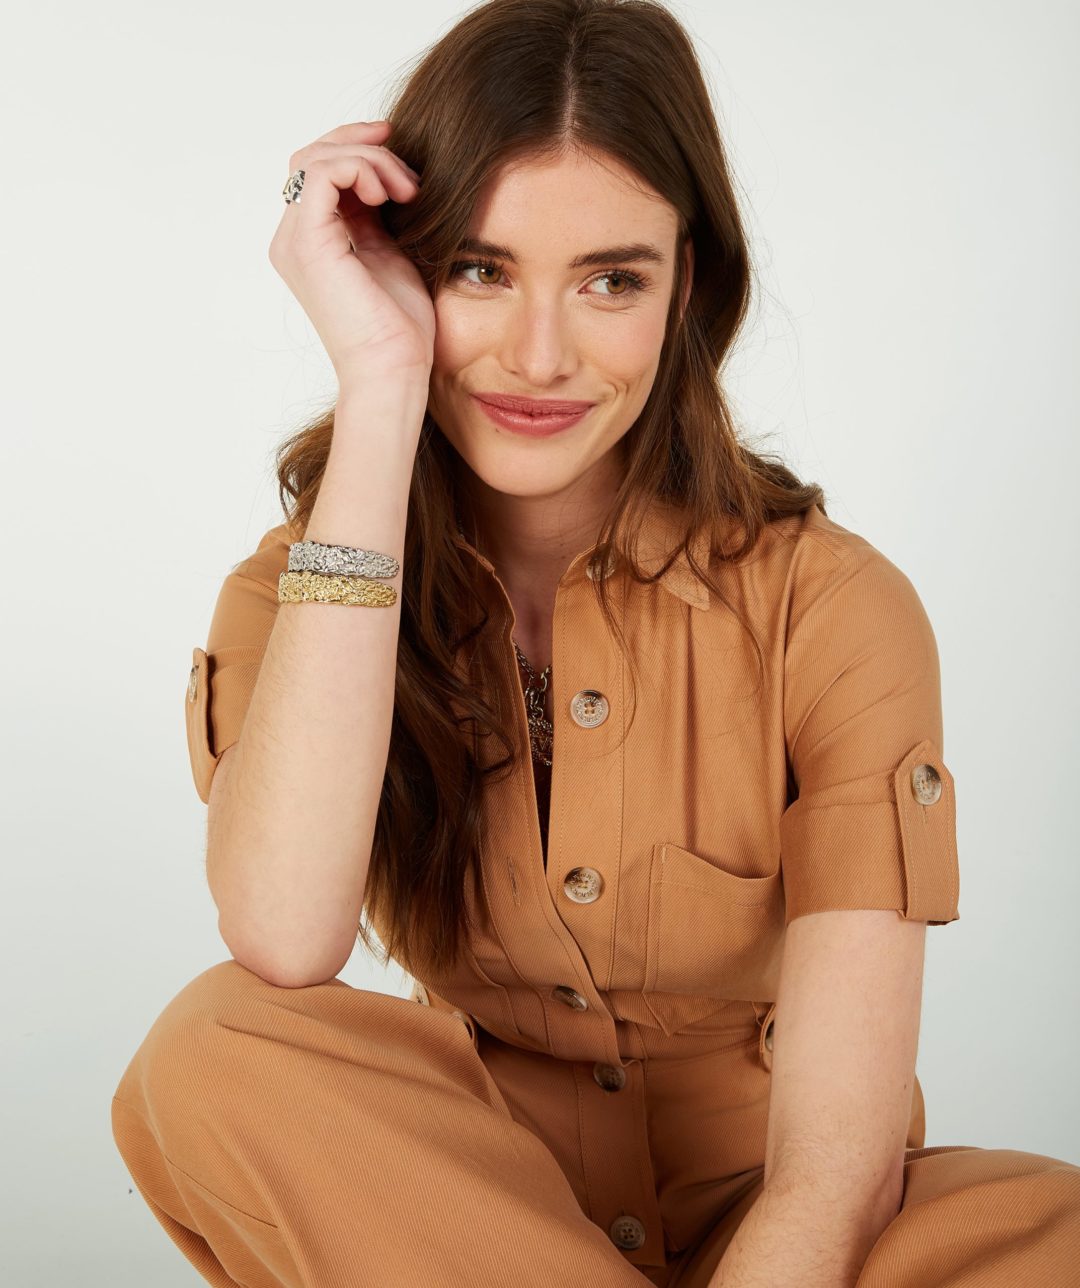 A girl wearing a stylish brown outfit, sitting on the floor with a joyful expression. This fashion body model ecommerce image was captured by I Heart Studios.